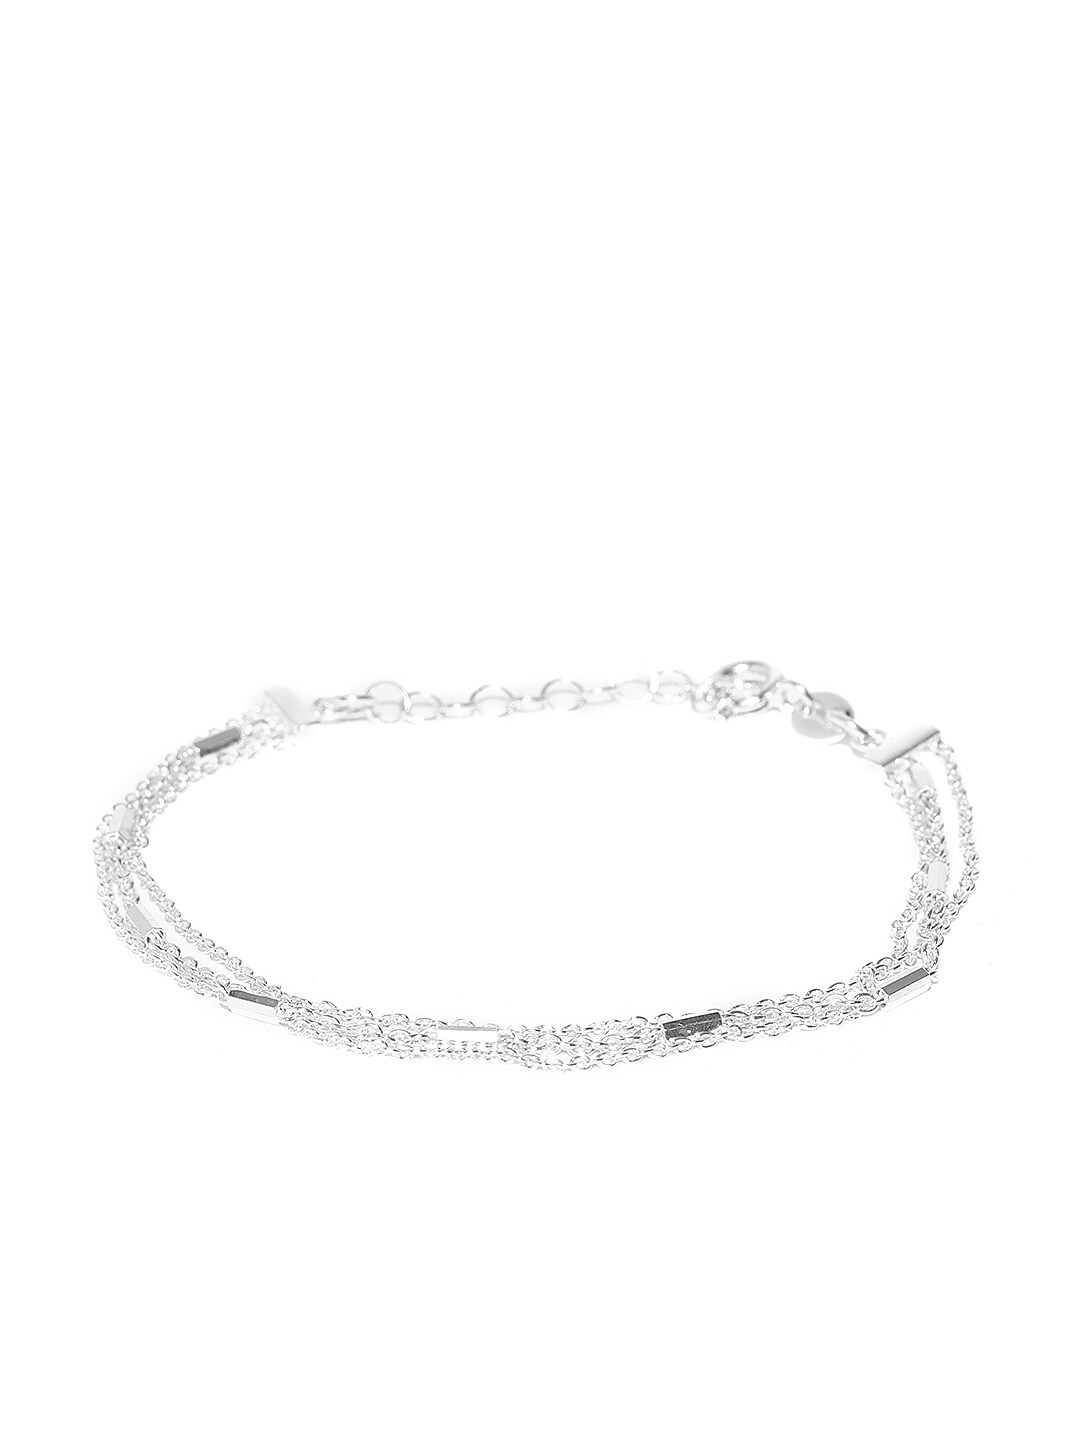 Carlton London 925 Sterling Silver Multistranded Bracelet with Silver Plating Price in India